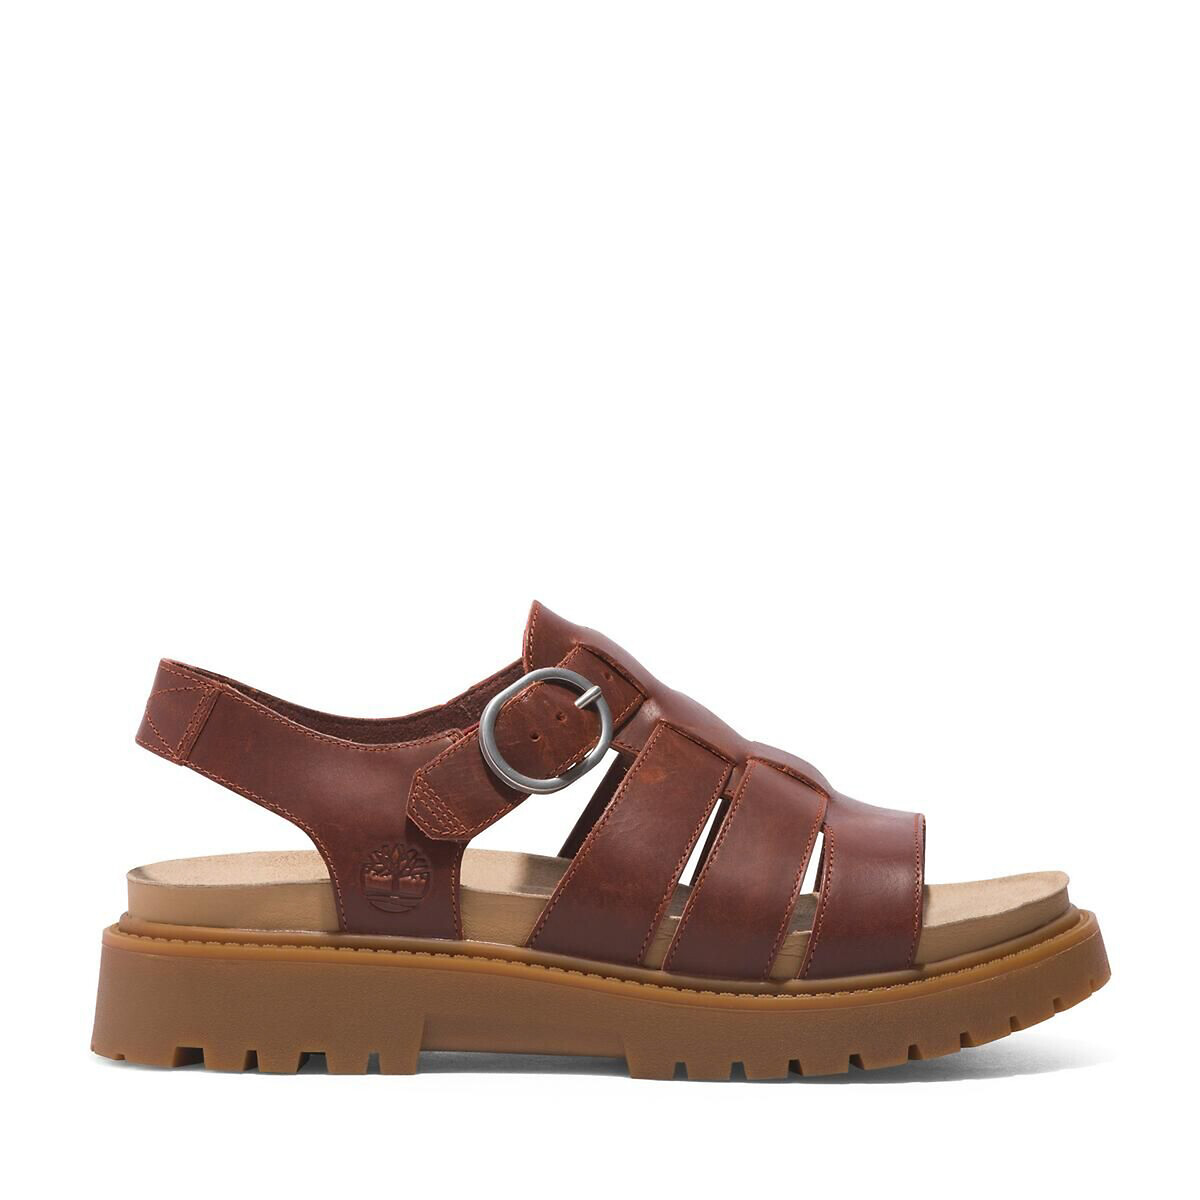 Image of Clairmont Way Fisherman Sandals in Leather